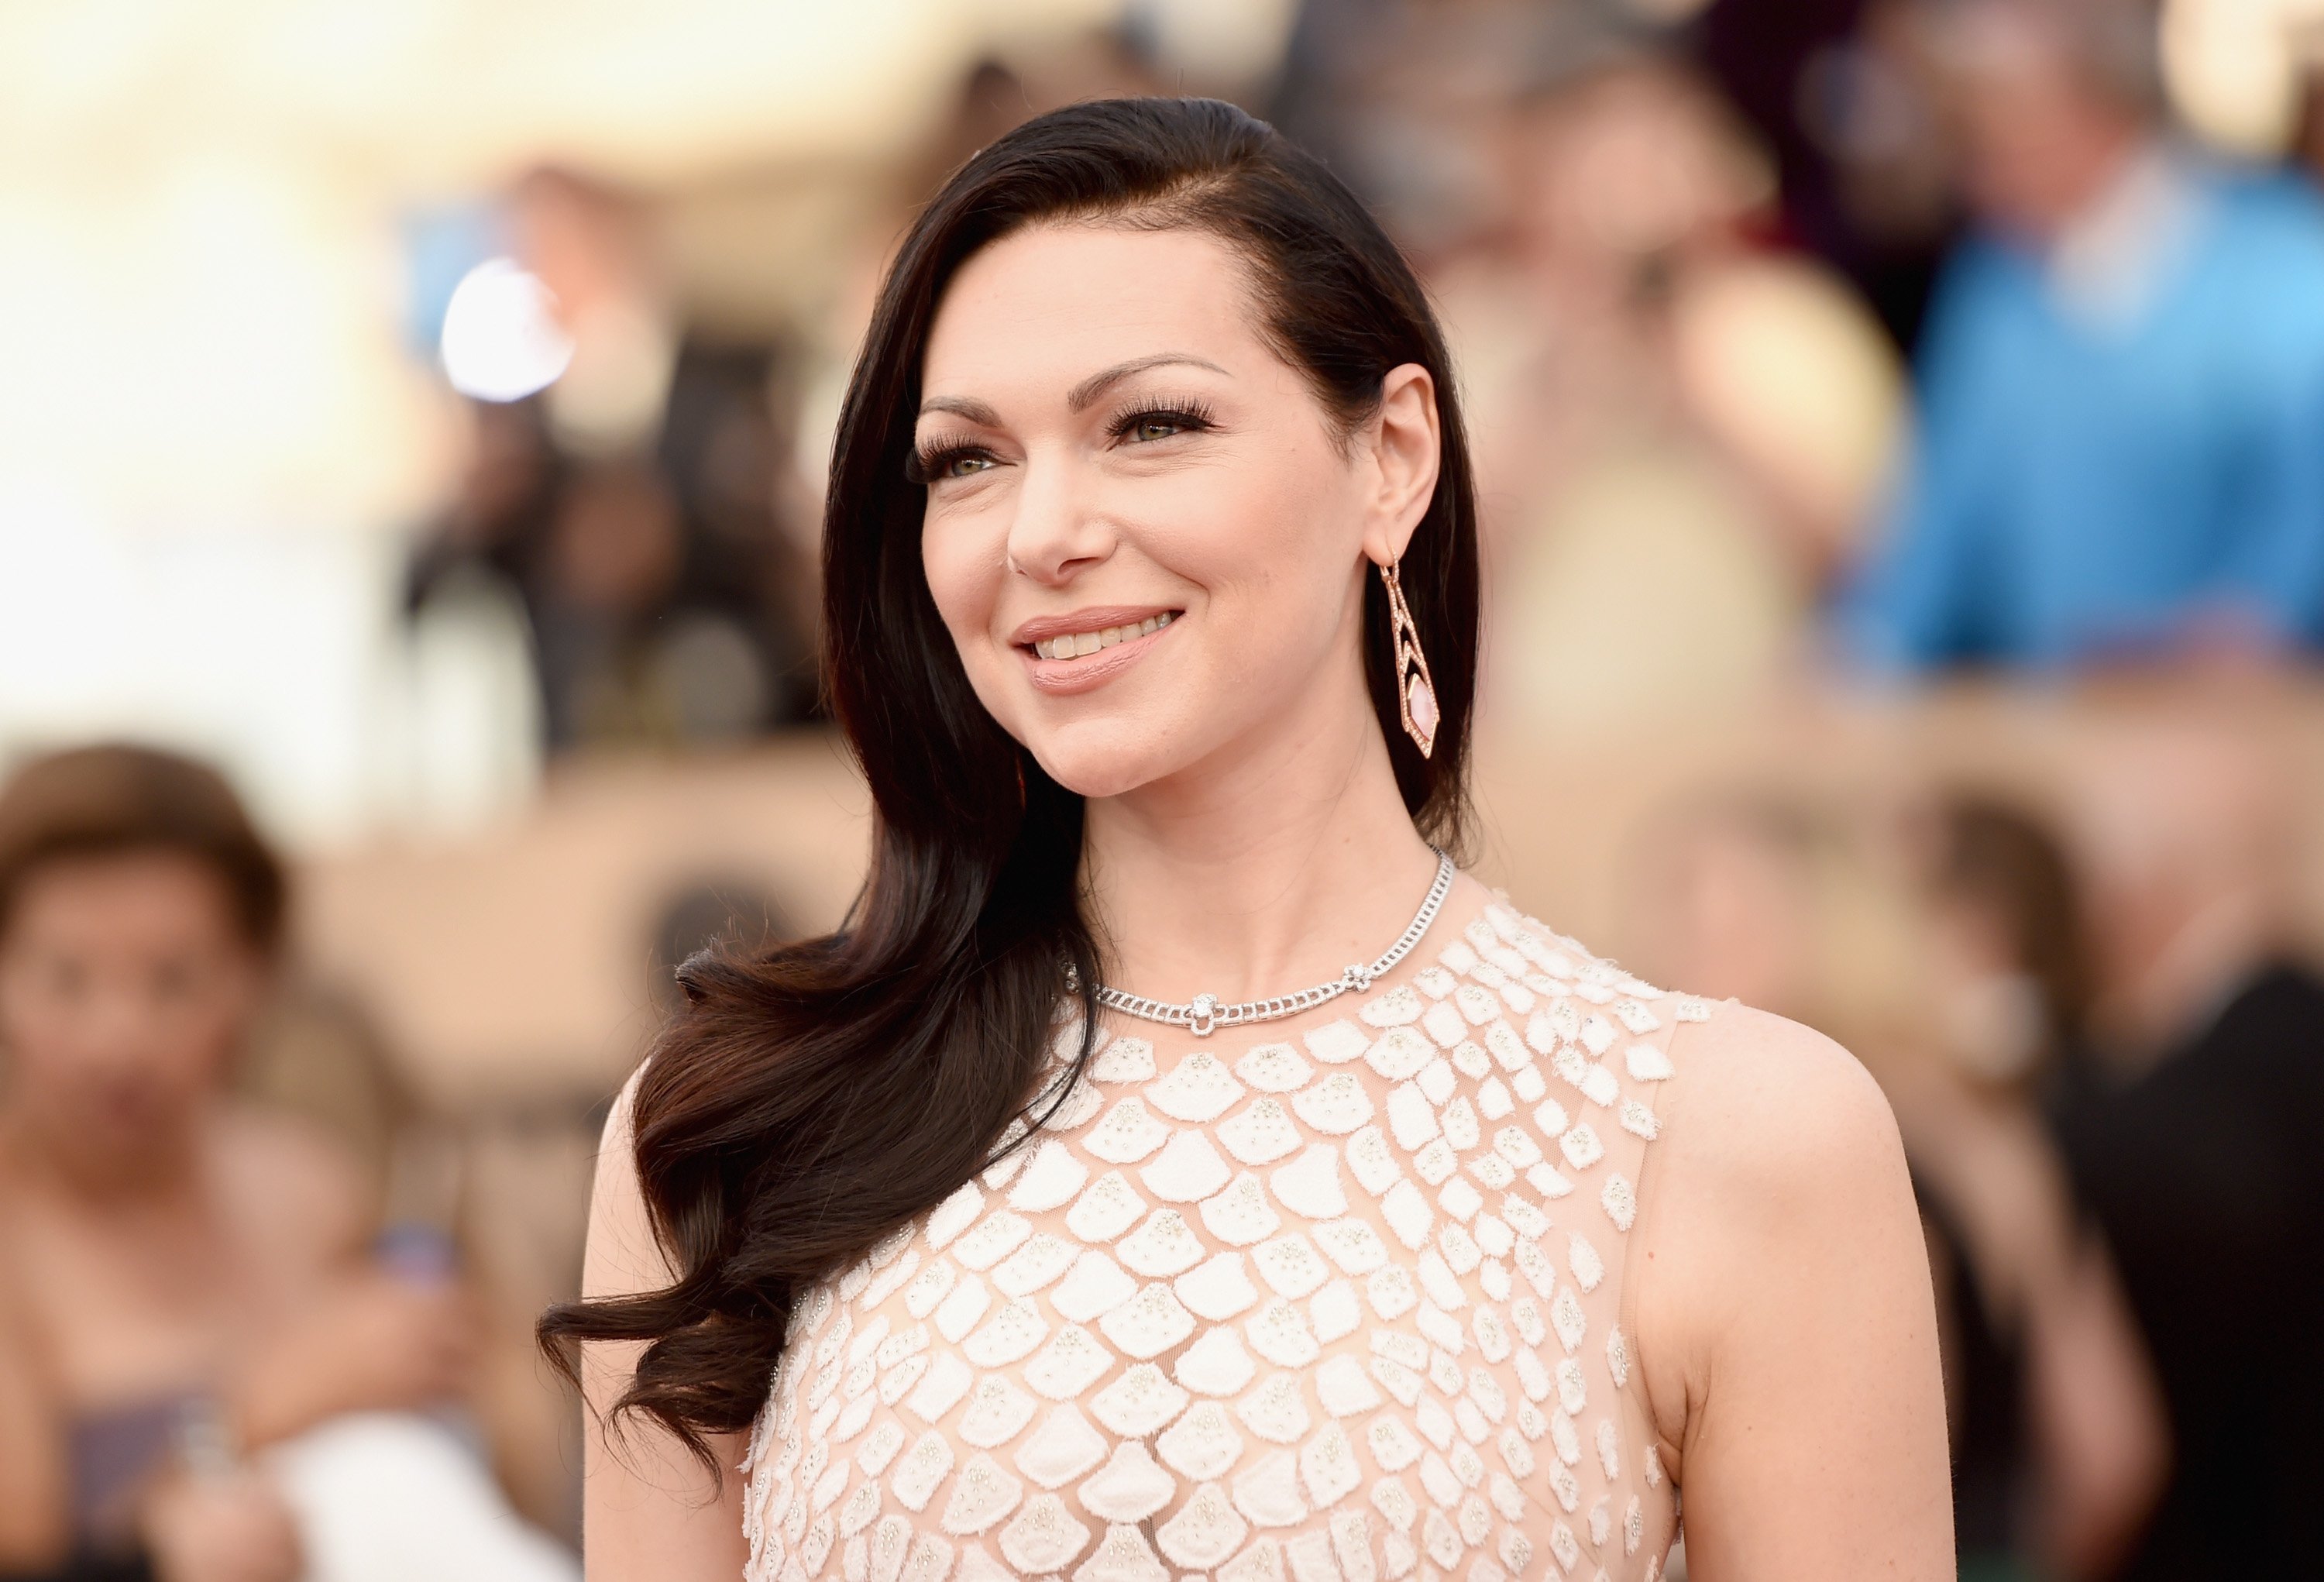 Laura Prepon attends The 22nd Annual Screen Actors Guild Awards at The Shrine Auditorium on January 30, 2016. | Photo: Getty Images